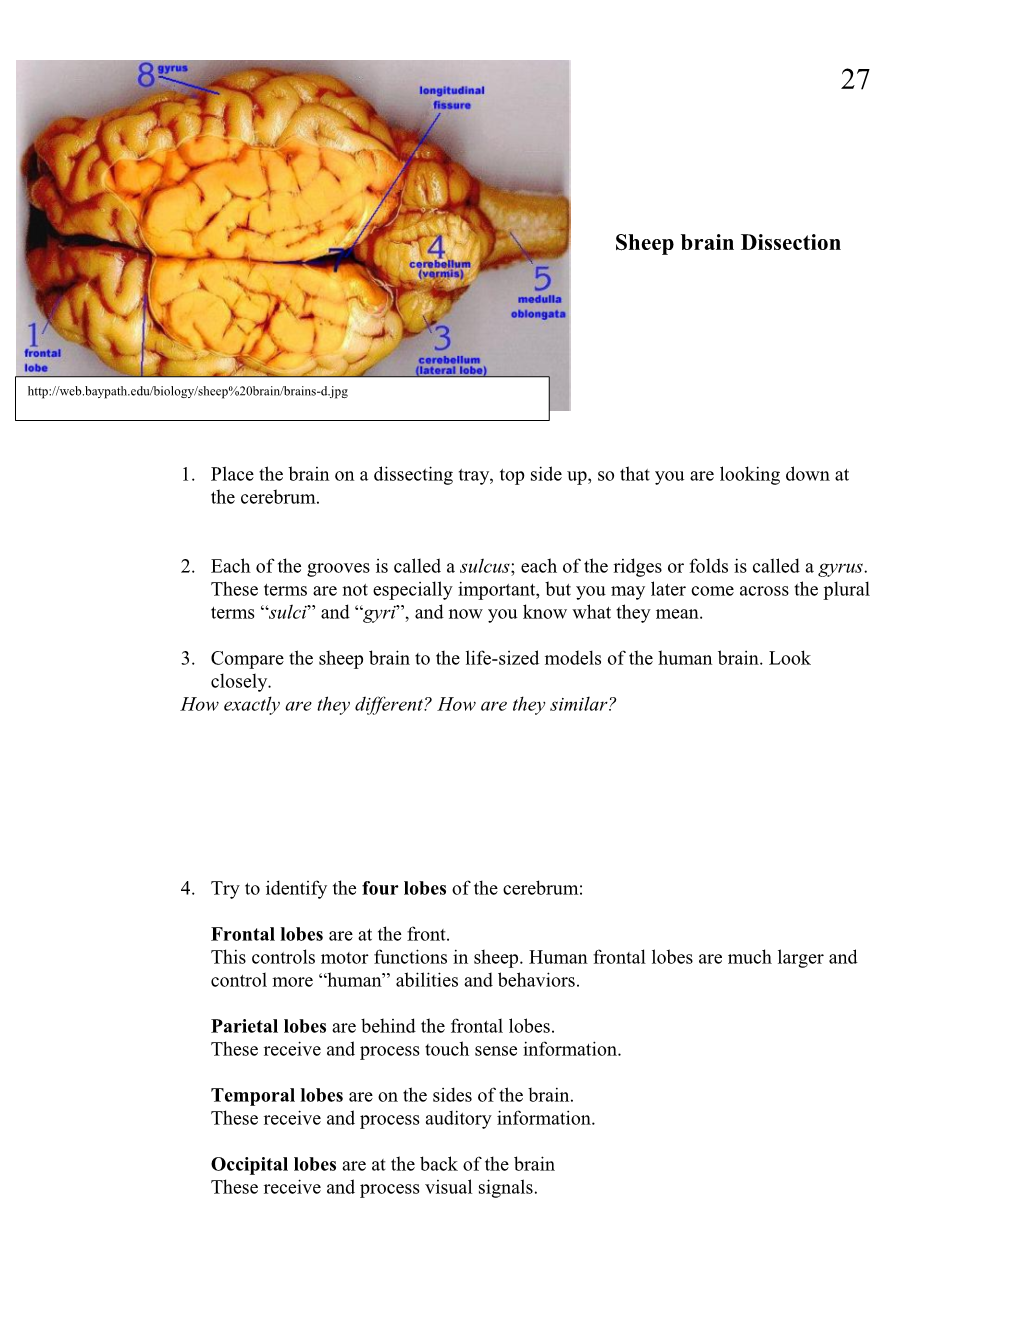 Sheep Brain Dissection s2